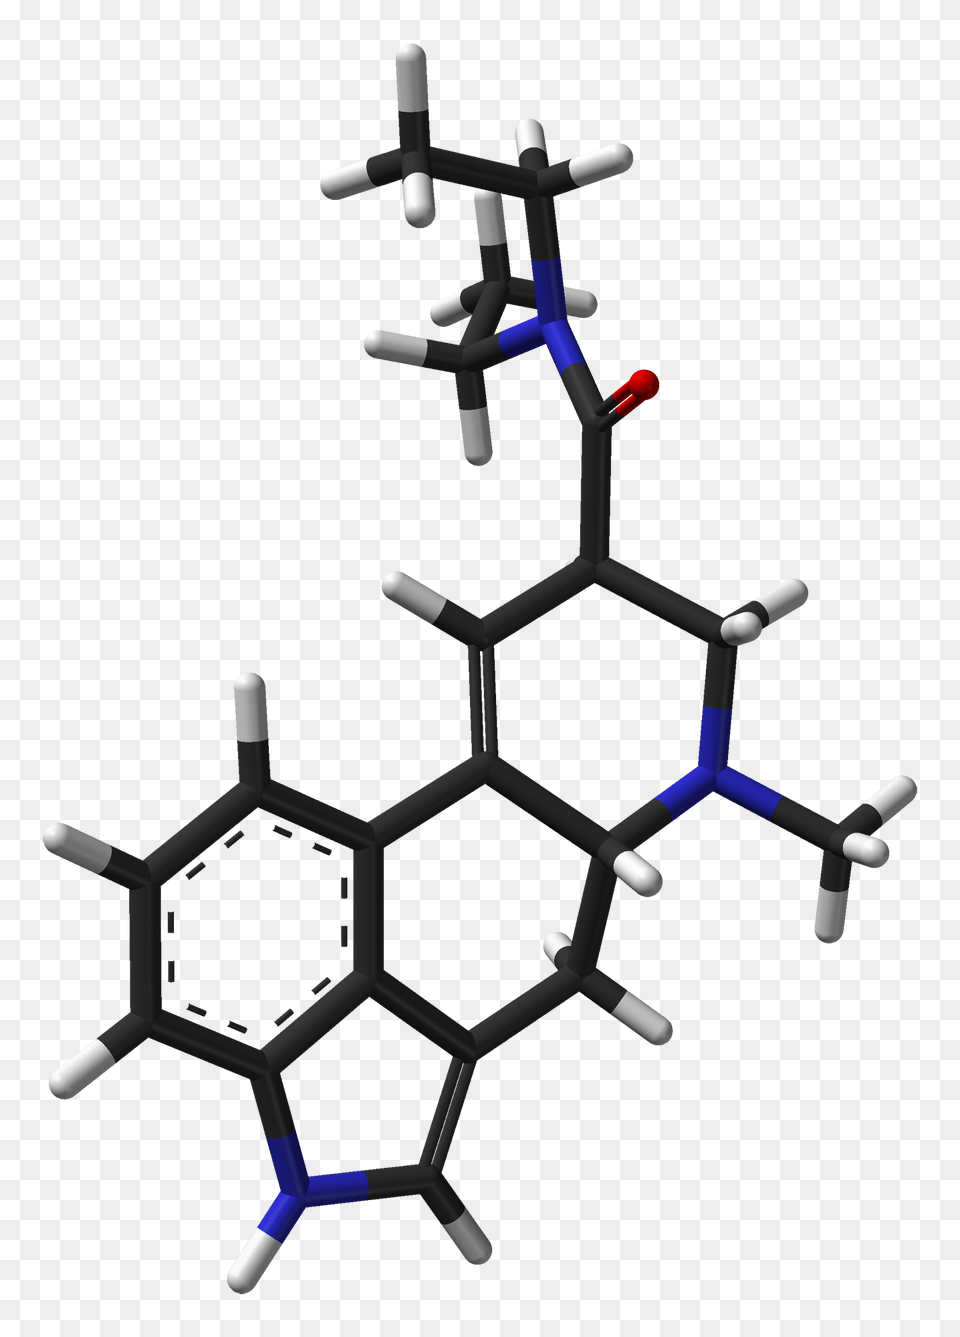 Lsd From Xtal And Spartan Sticks Web, Art, Graphics Free Transparent Png